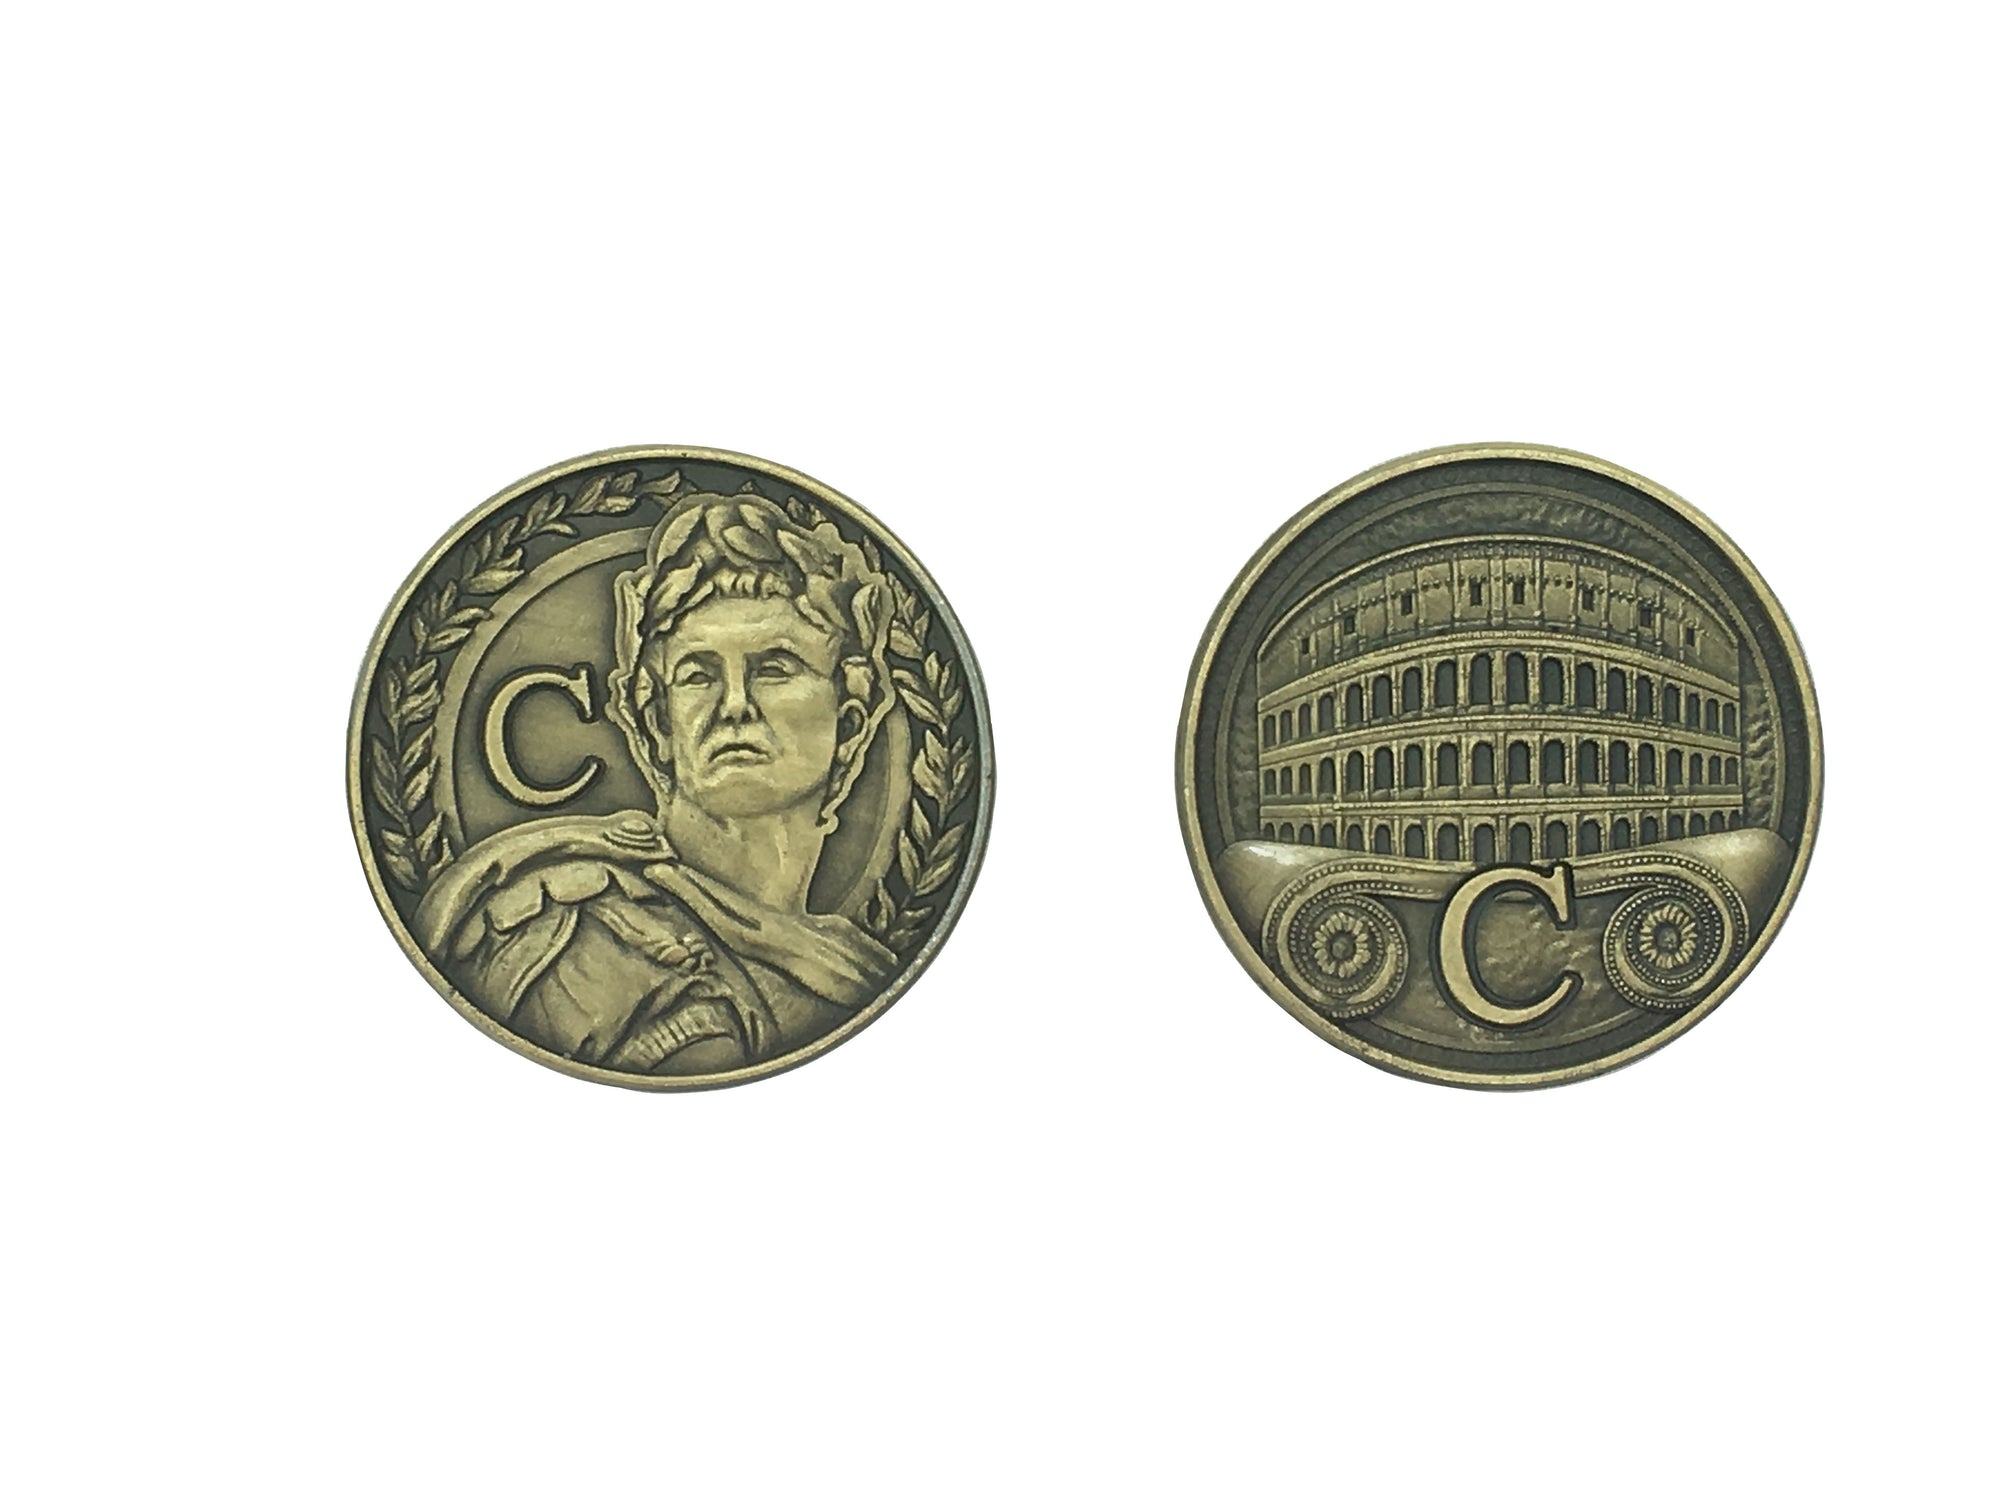 Adventure Coins - Romans Metal Coins Variety Pack Set of 10